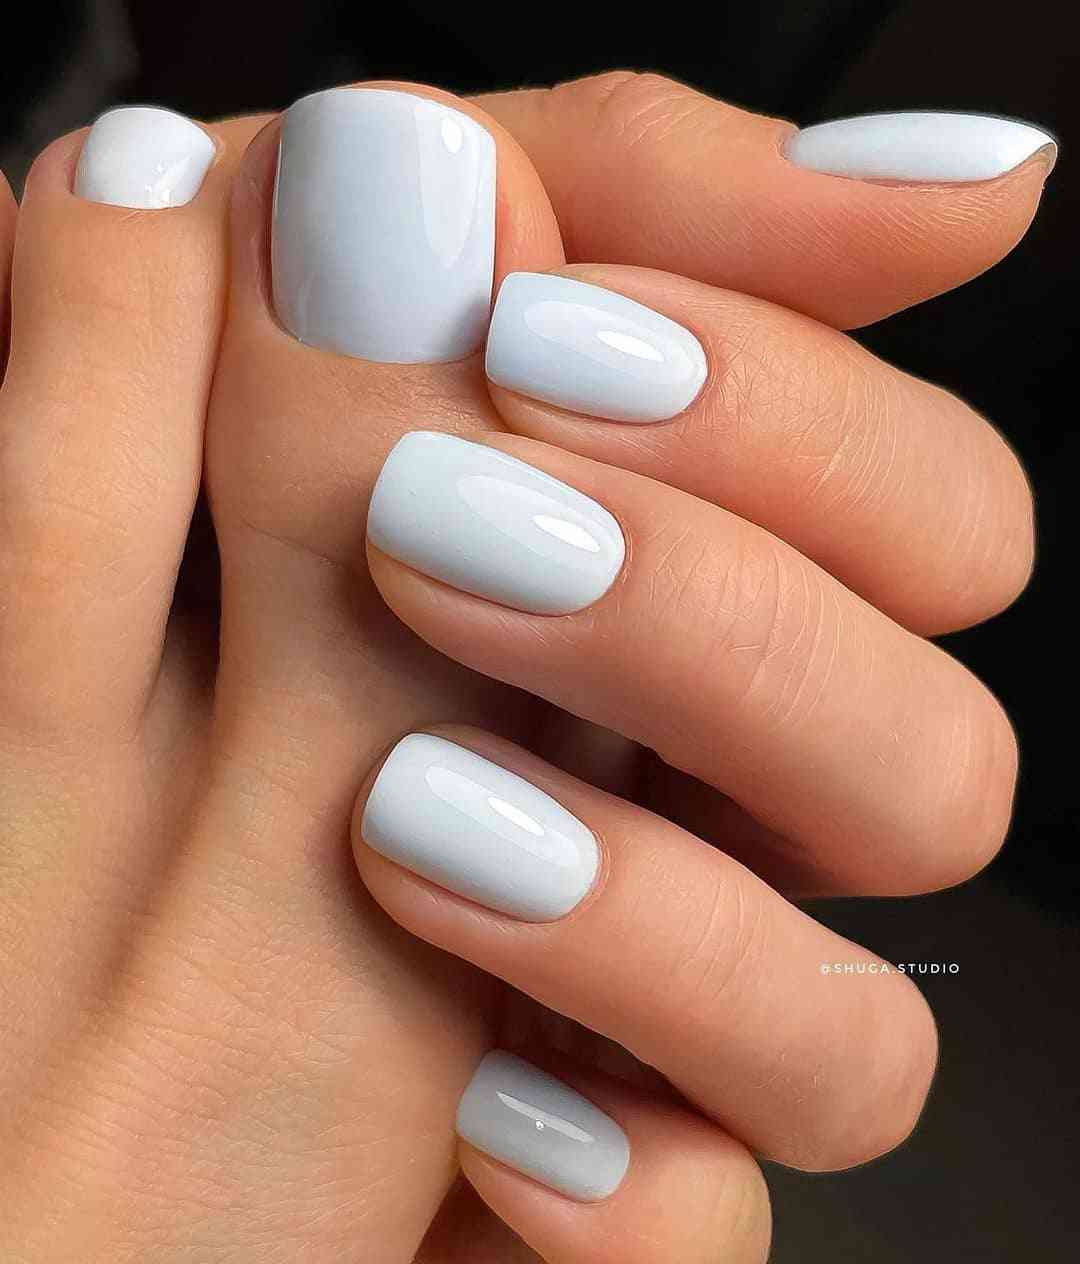 35 Cute Summer Nails To Rock For Women In 2021 images 31